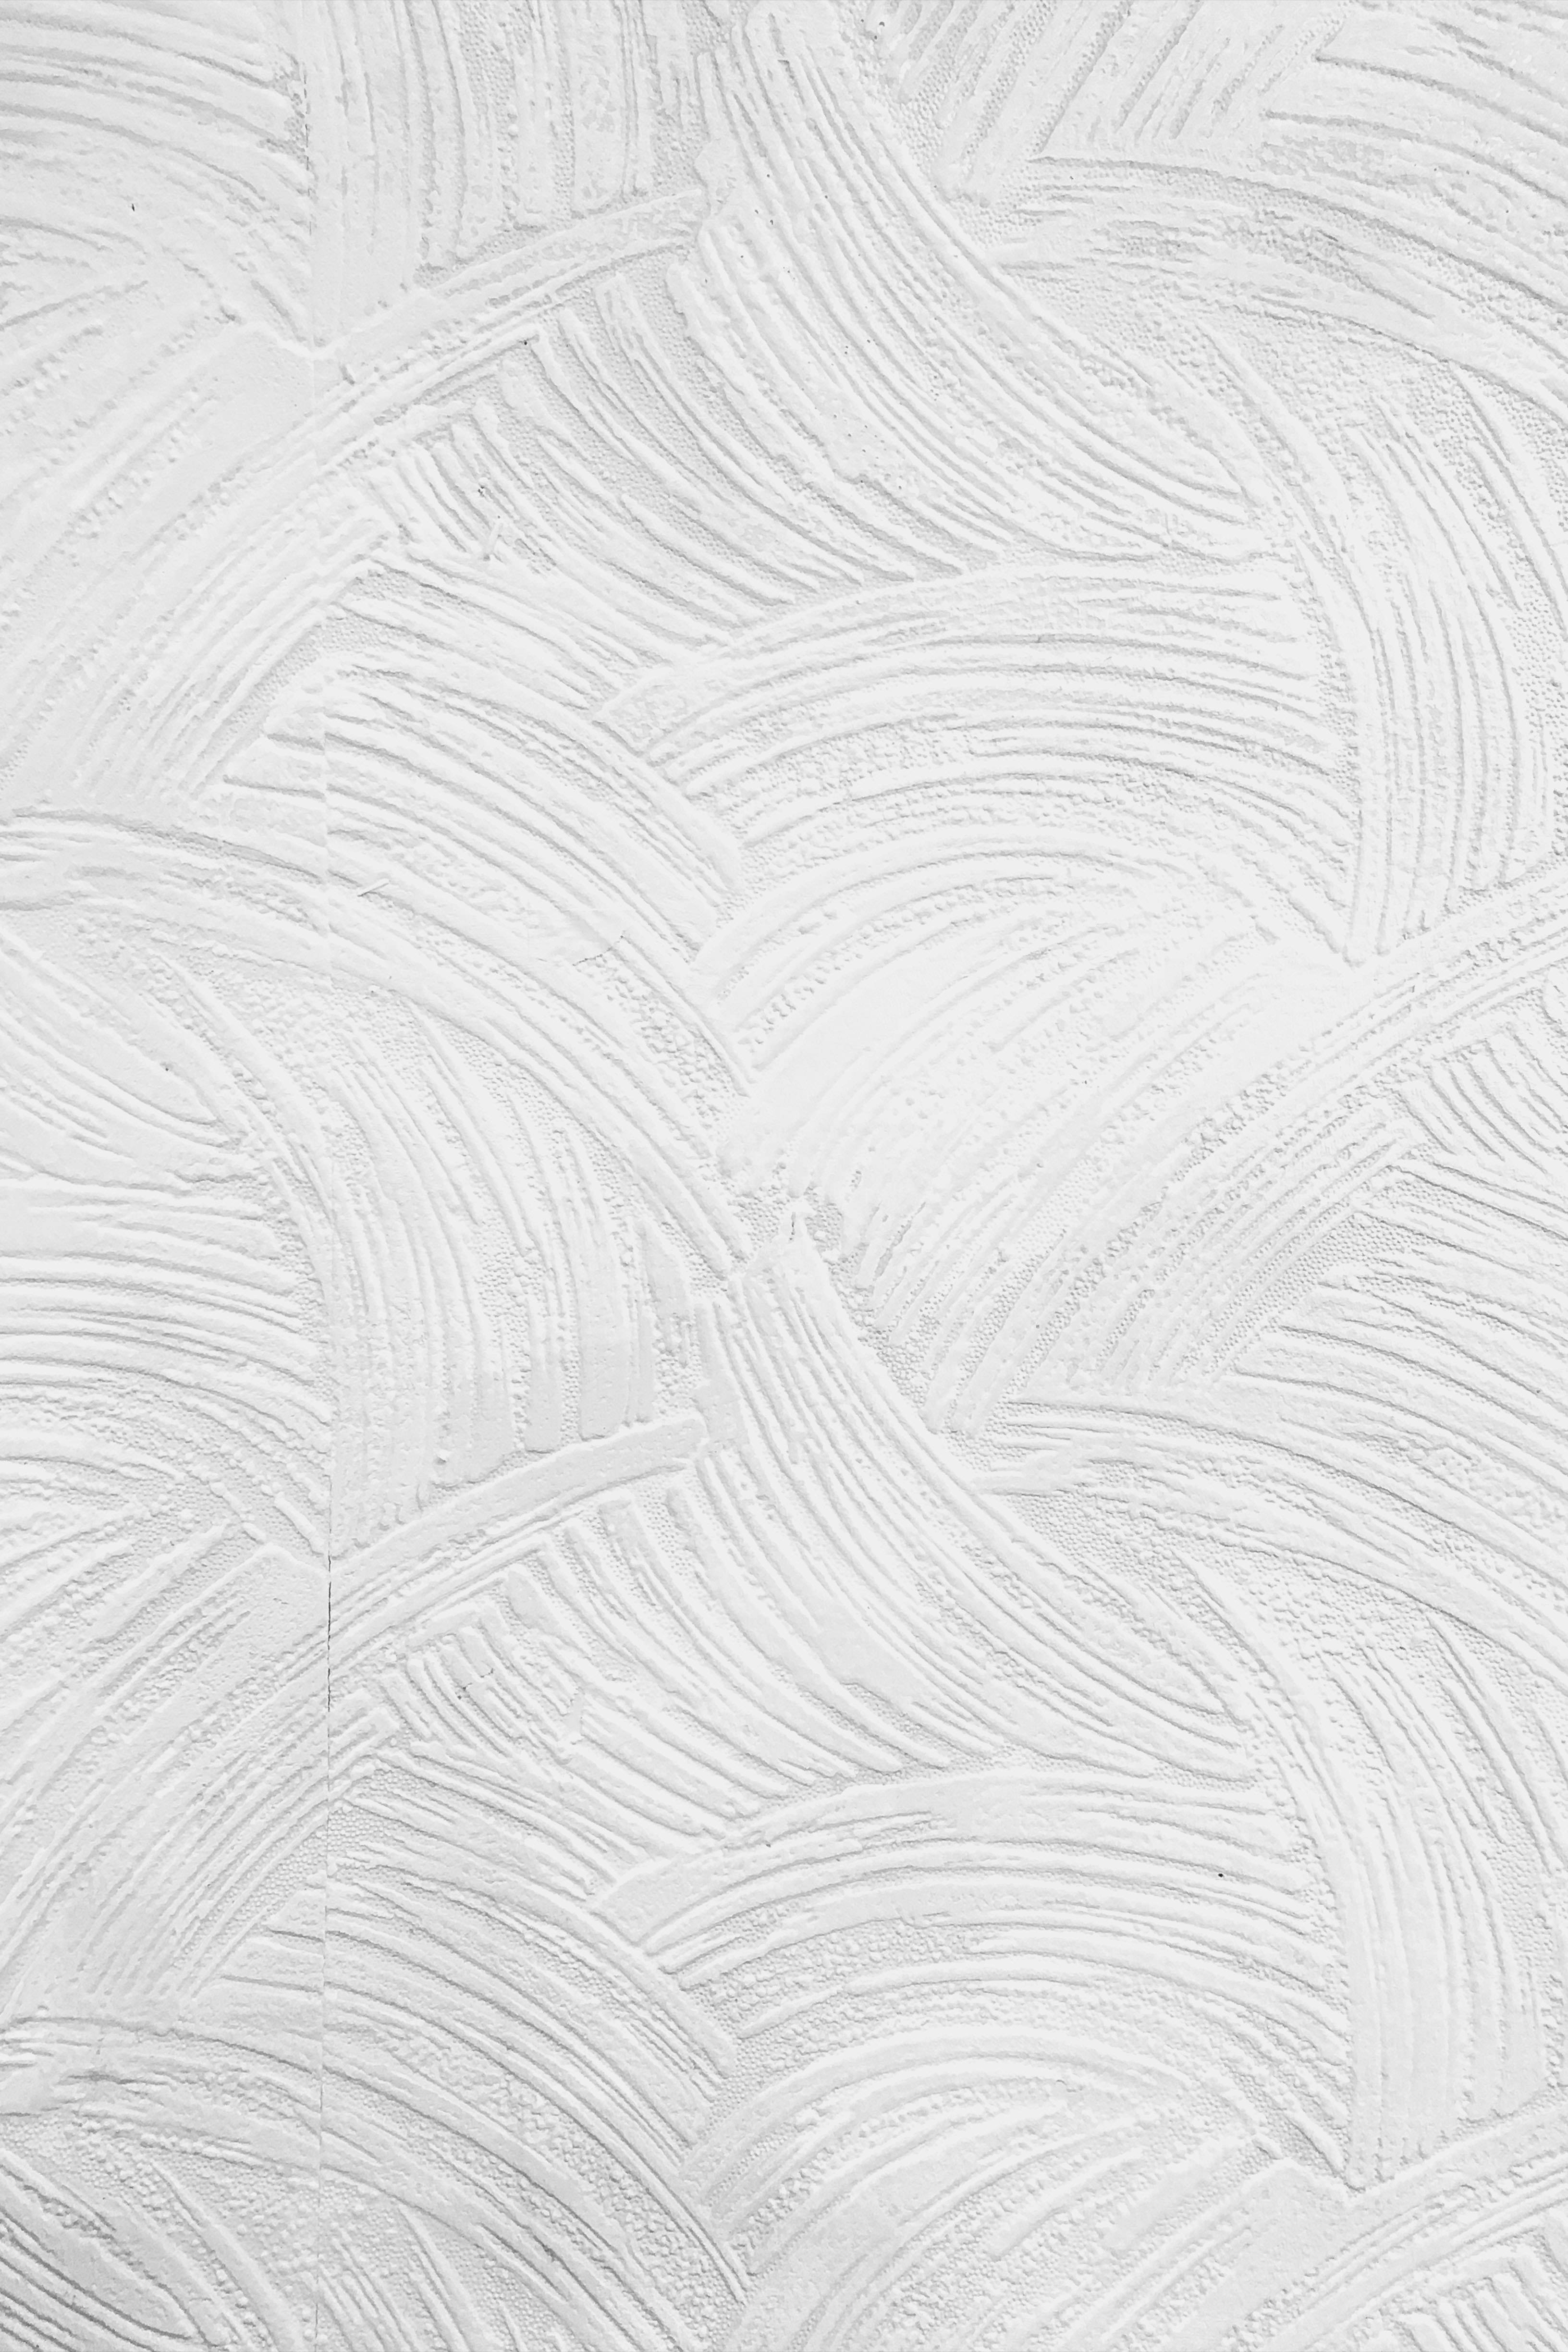 Marble 4K White Abstract Minimalist Lines Wallpaper